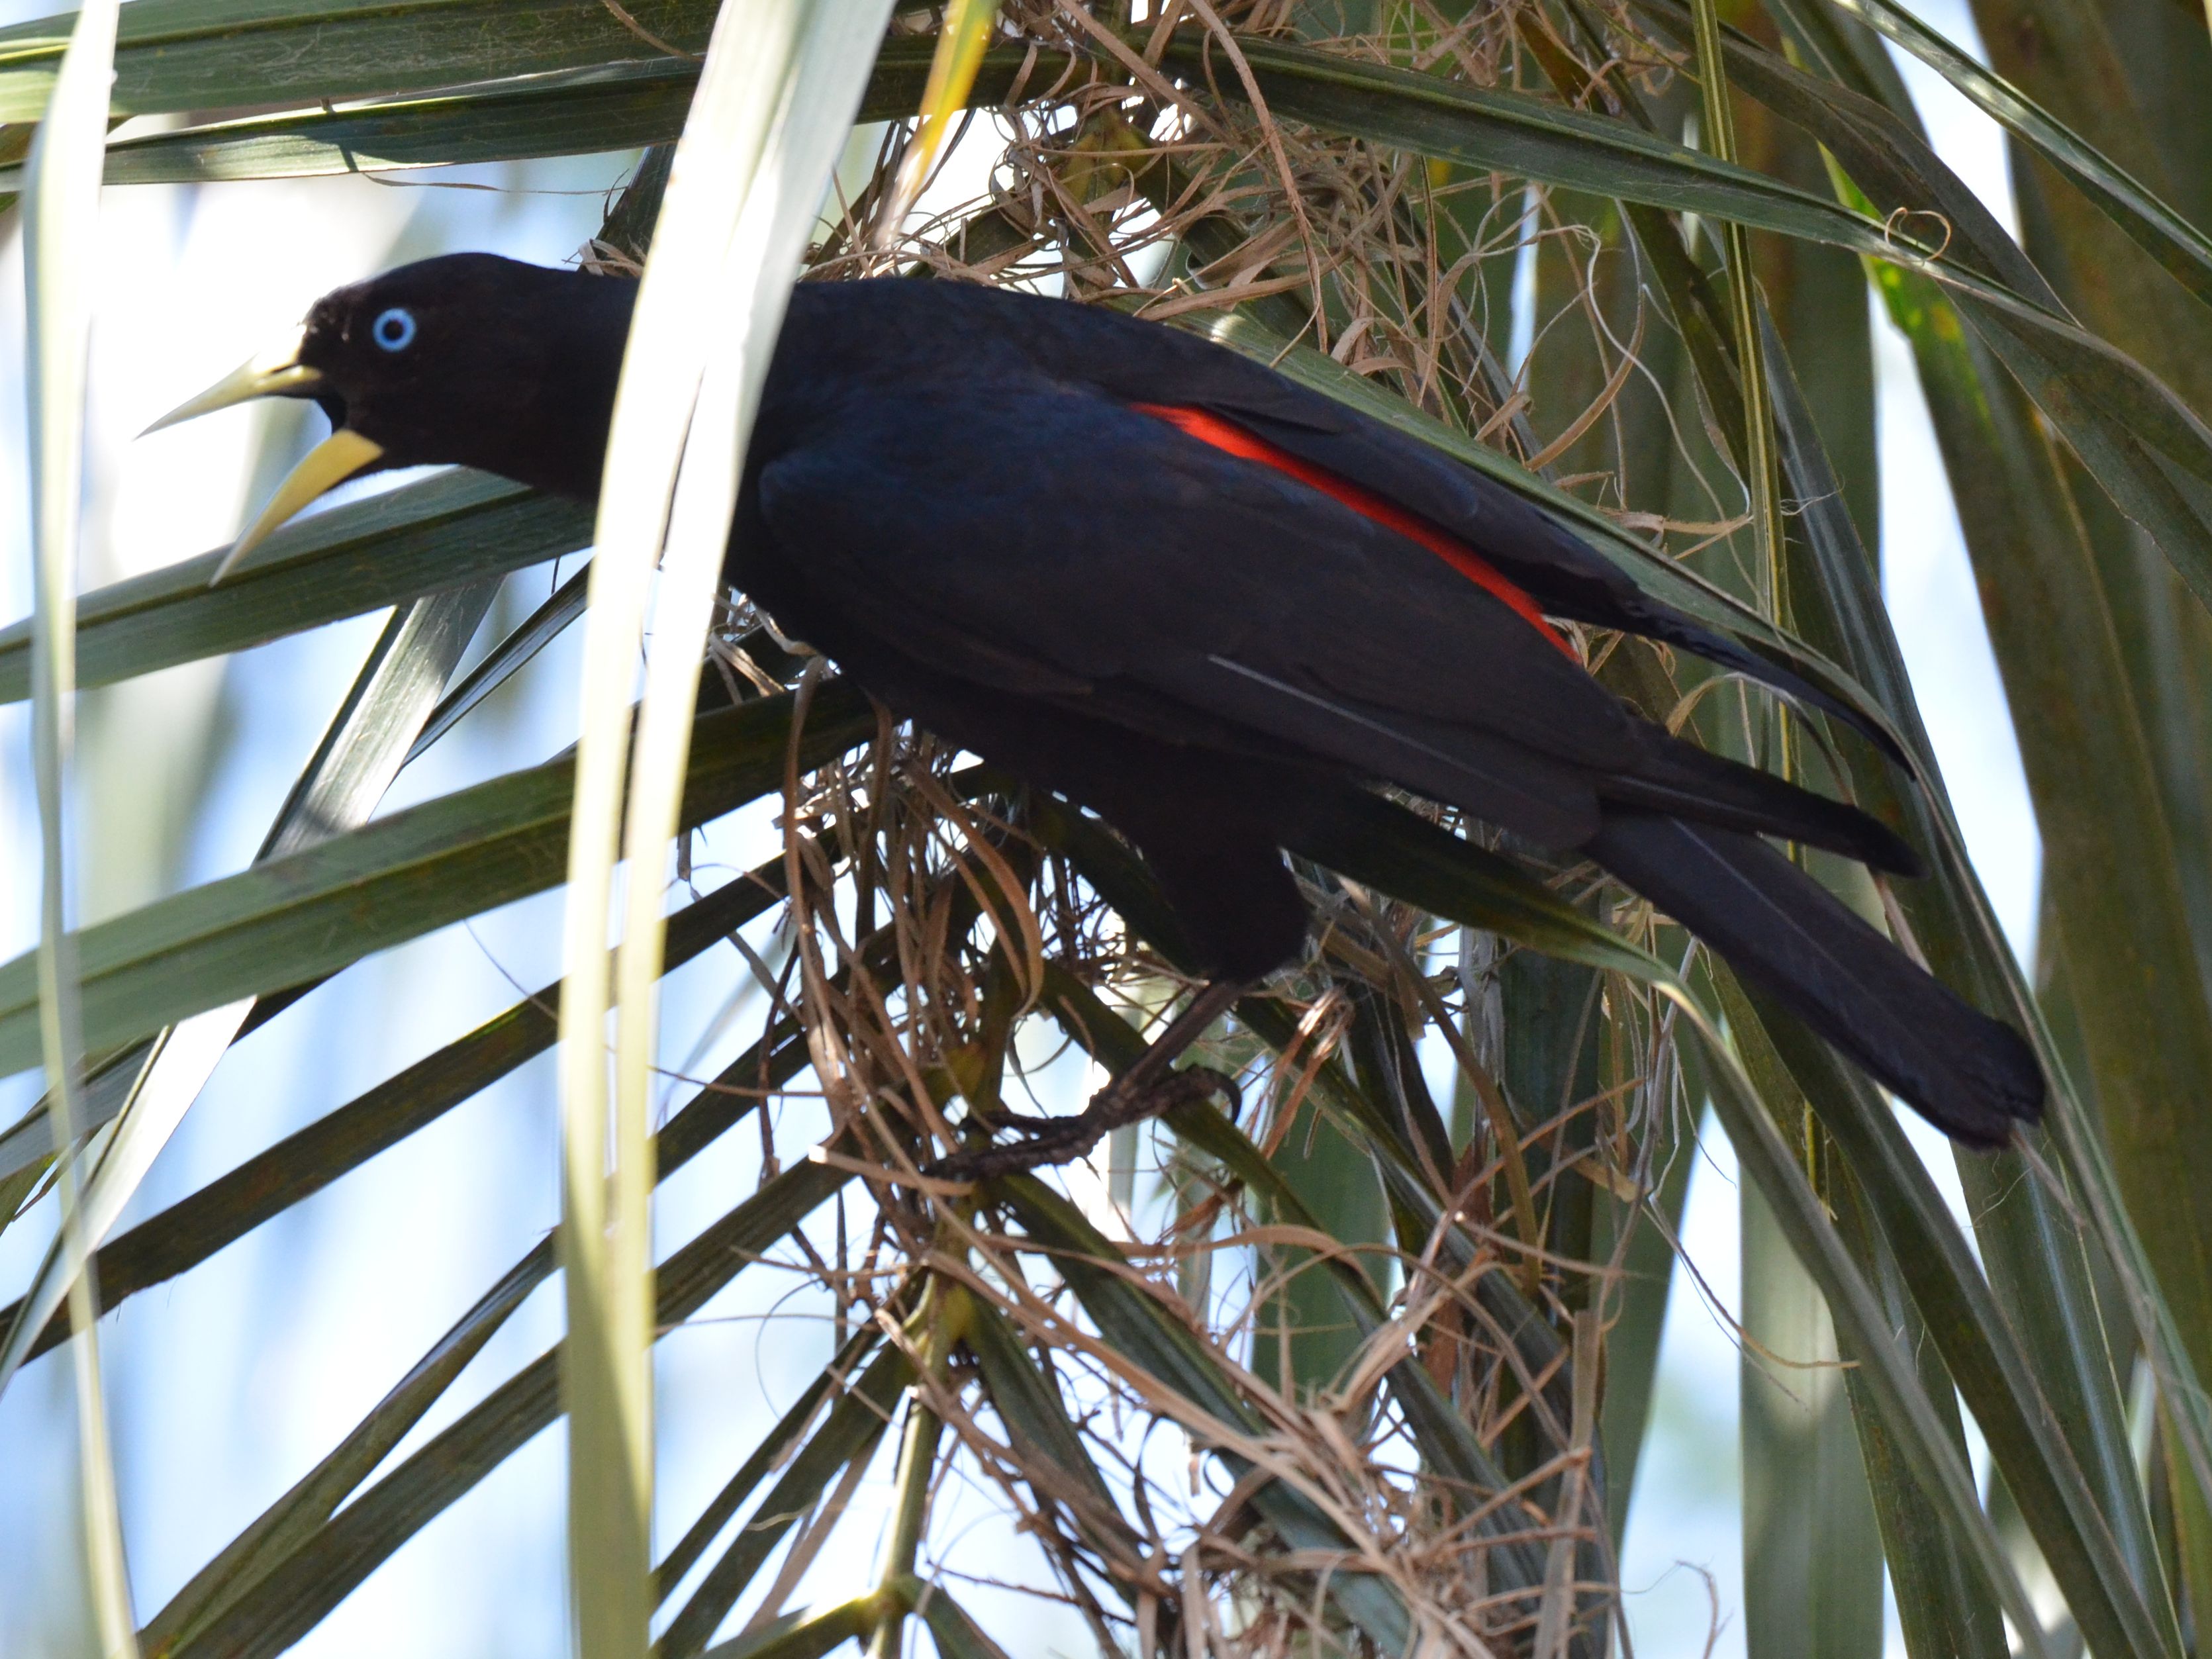 Click picture to see more Red-rumped Caciques.